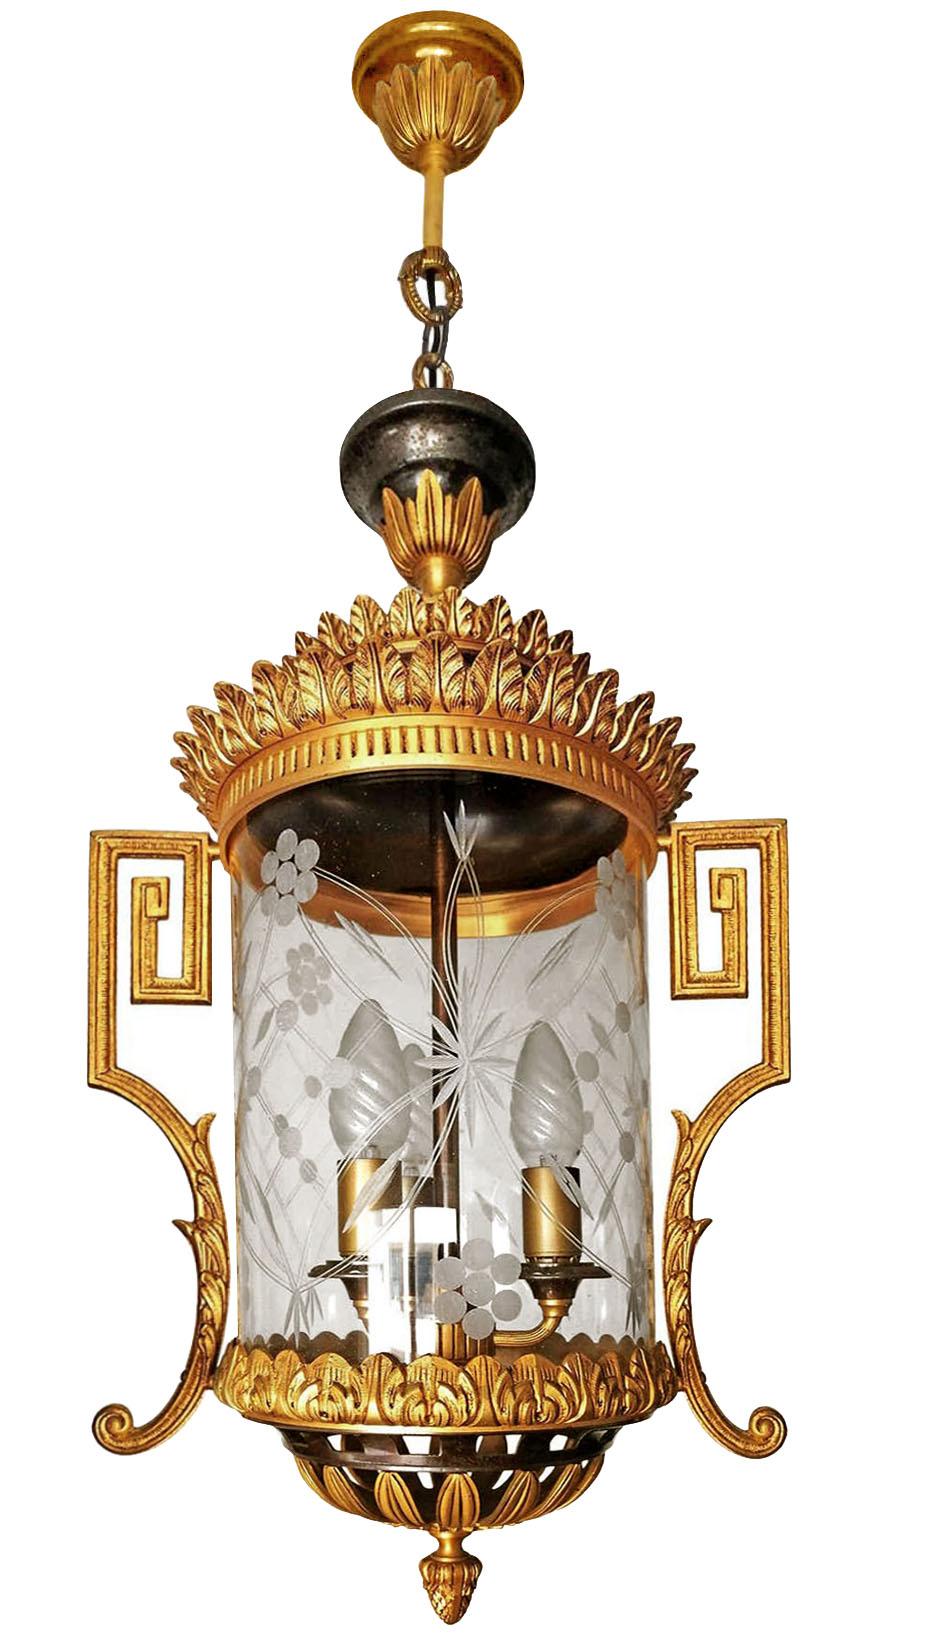 20th Century French Empire Gilt and Patinated Bronze and Cut Glass 3-Light Lantern Chandelier For Sale